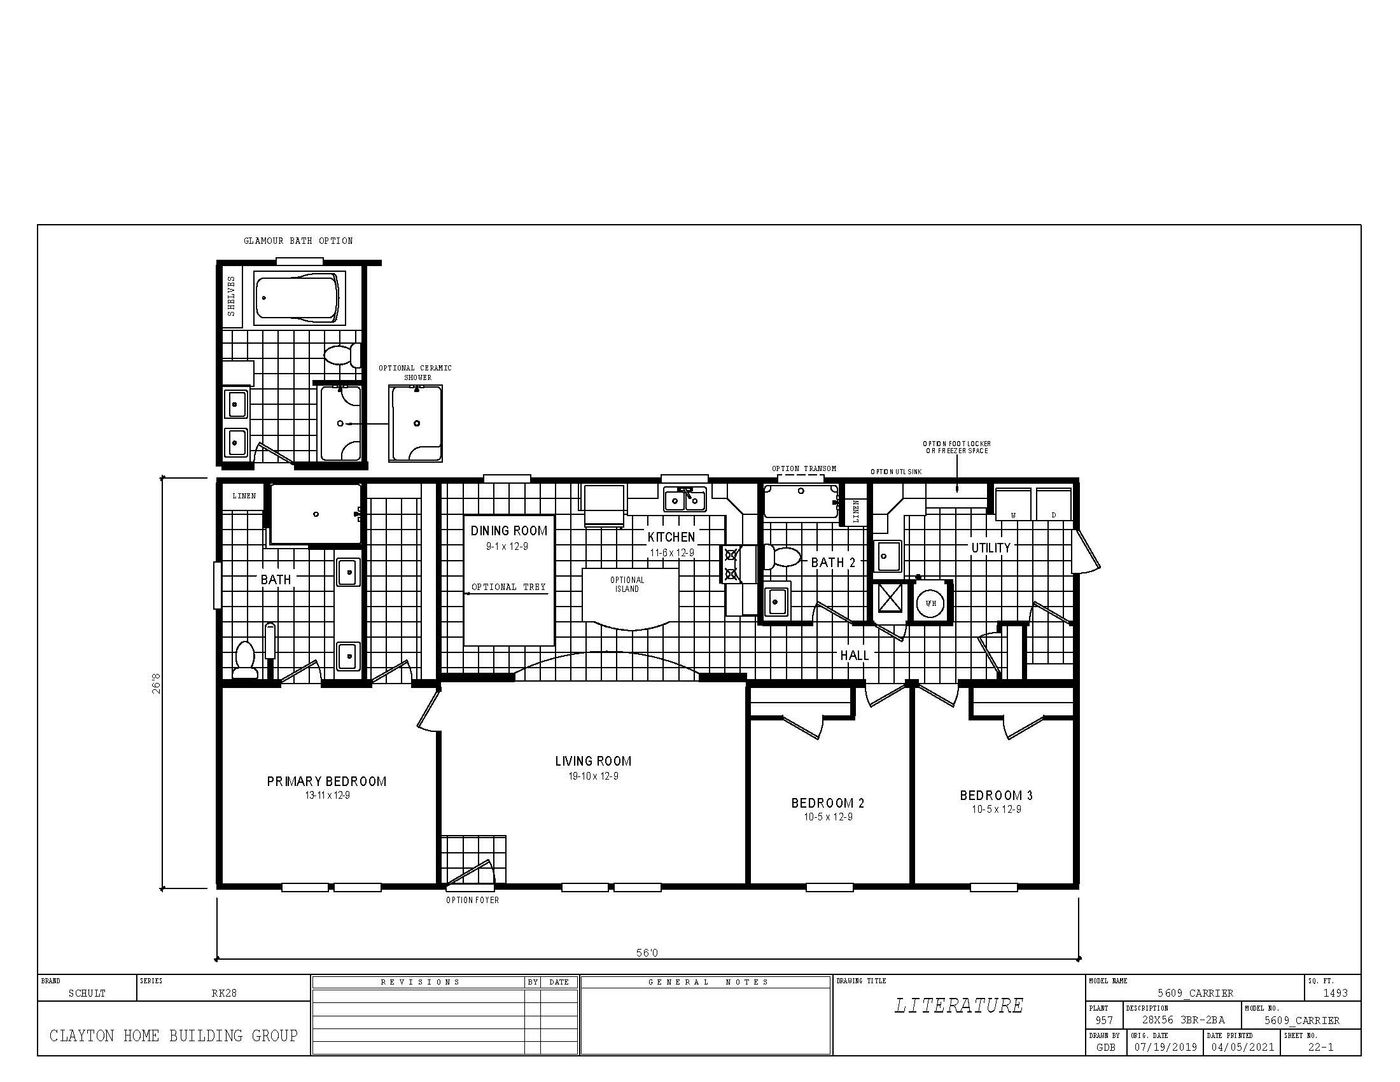 The 5609 ENTERPRISE 5628 Floor Plan. This Manufactured Mobile Home features 3 bedrooms and 2 baths.